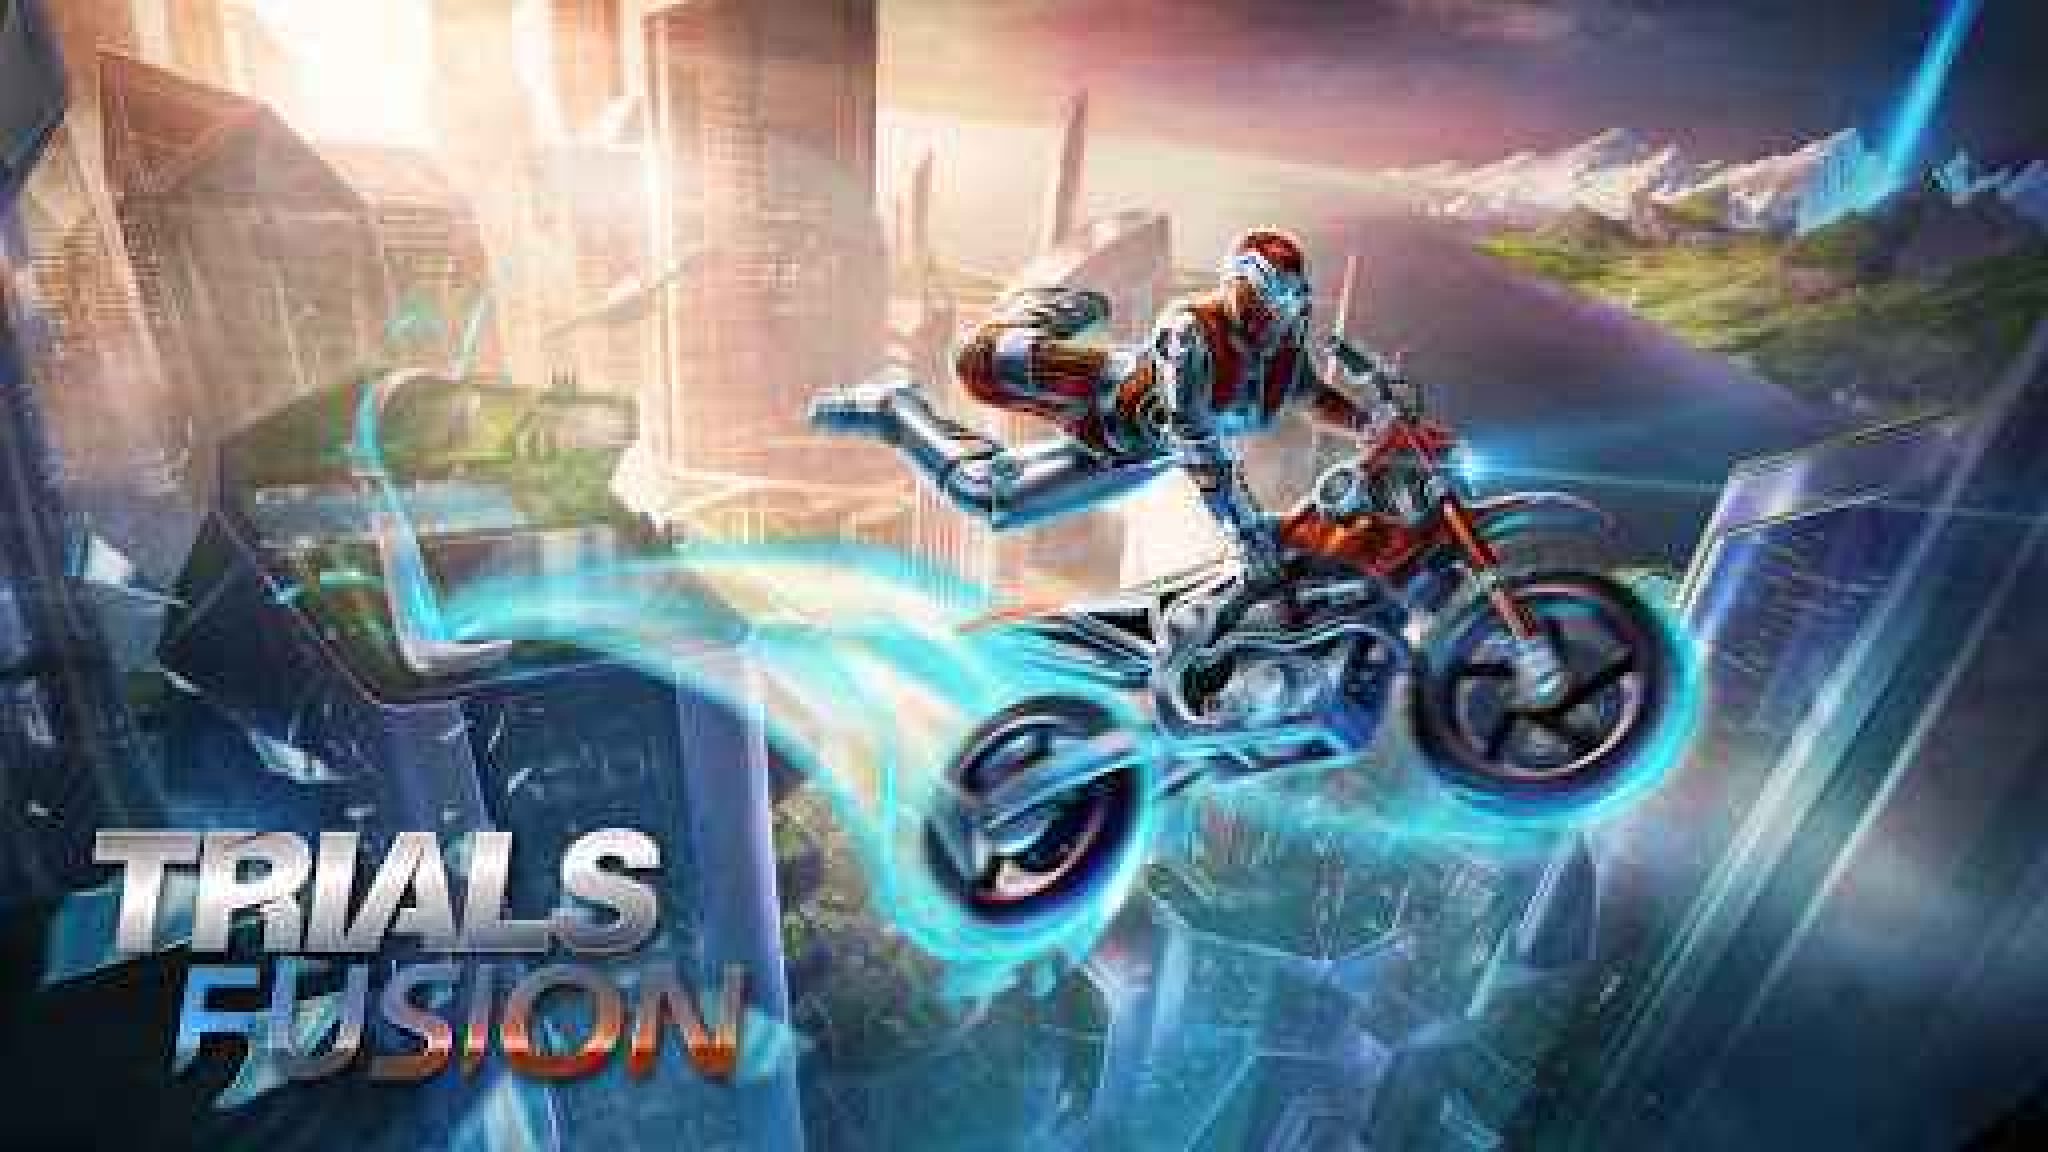 trials fusion pc free download